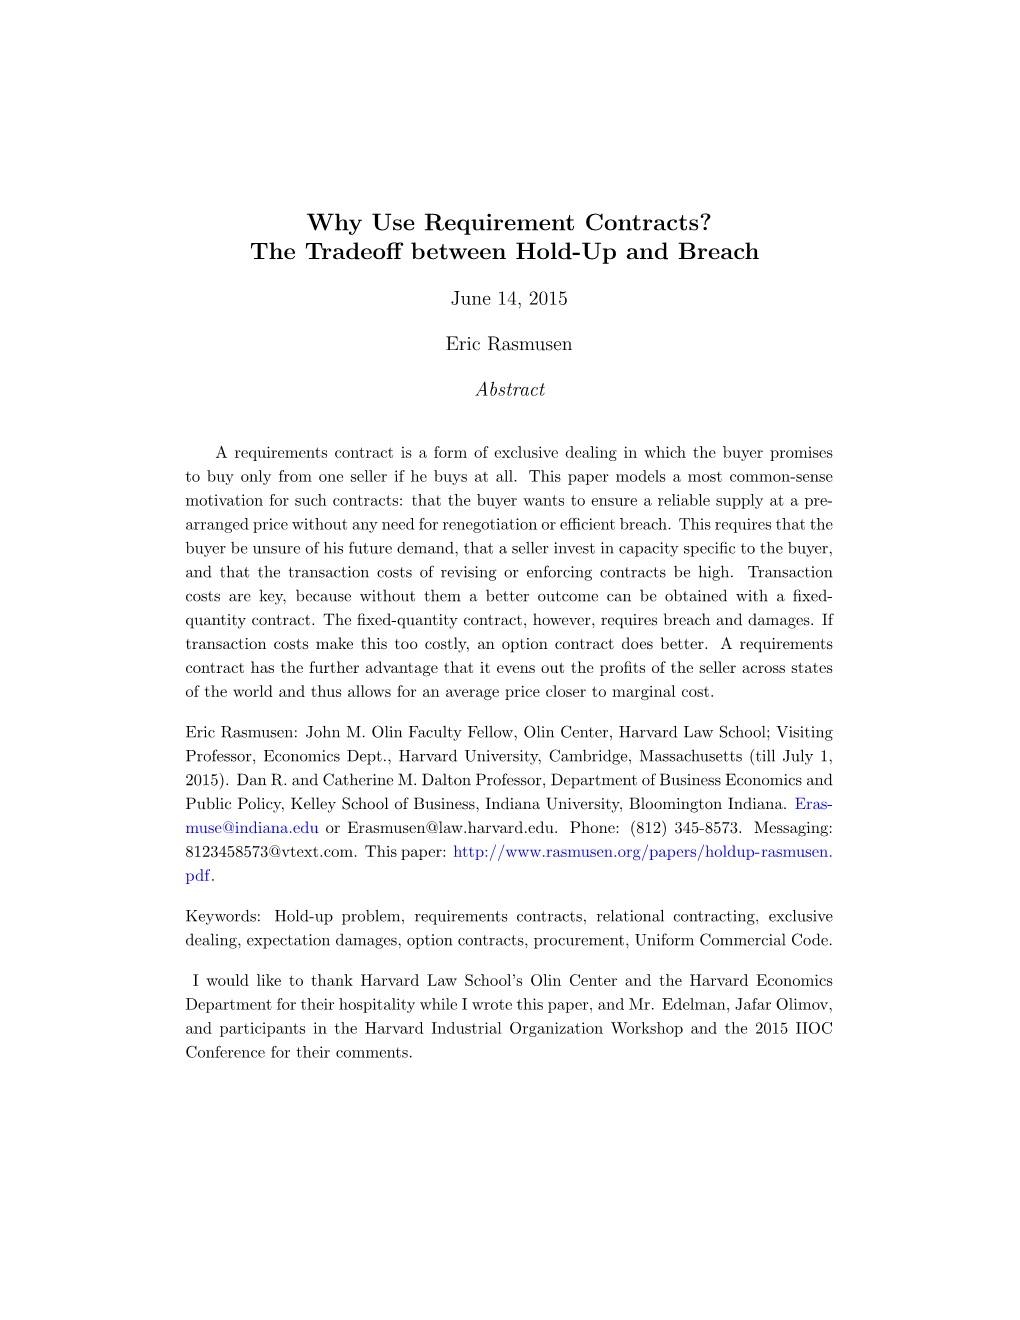 Why Use Requirement Contracts? the Tradeoff Between Hold-Up And